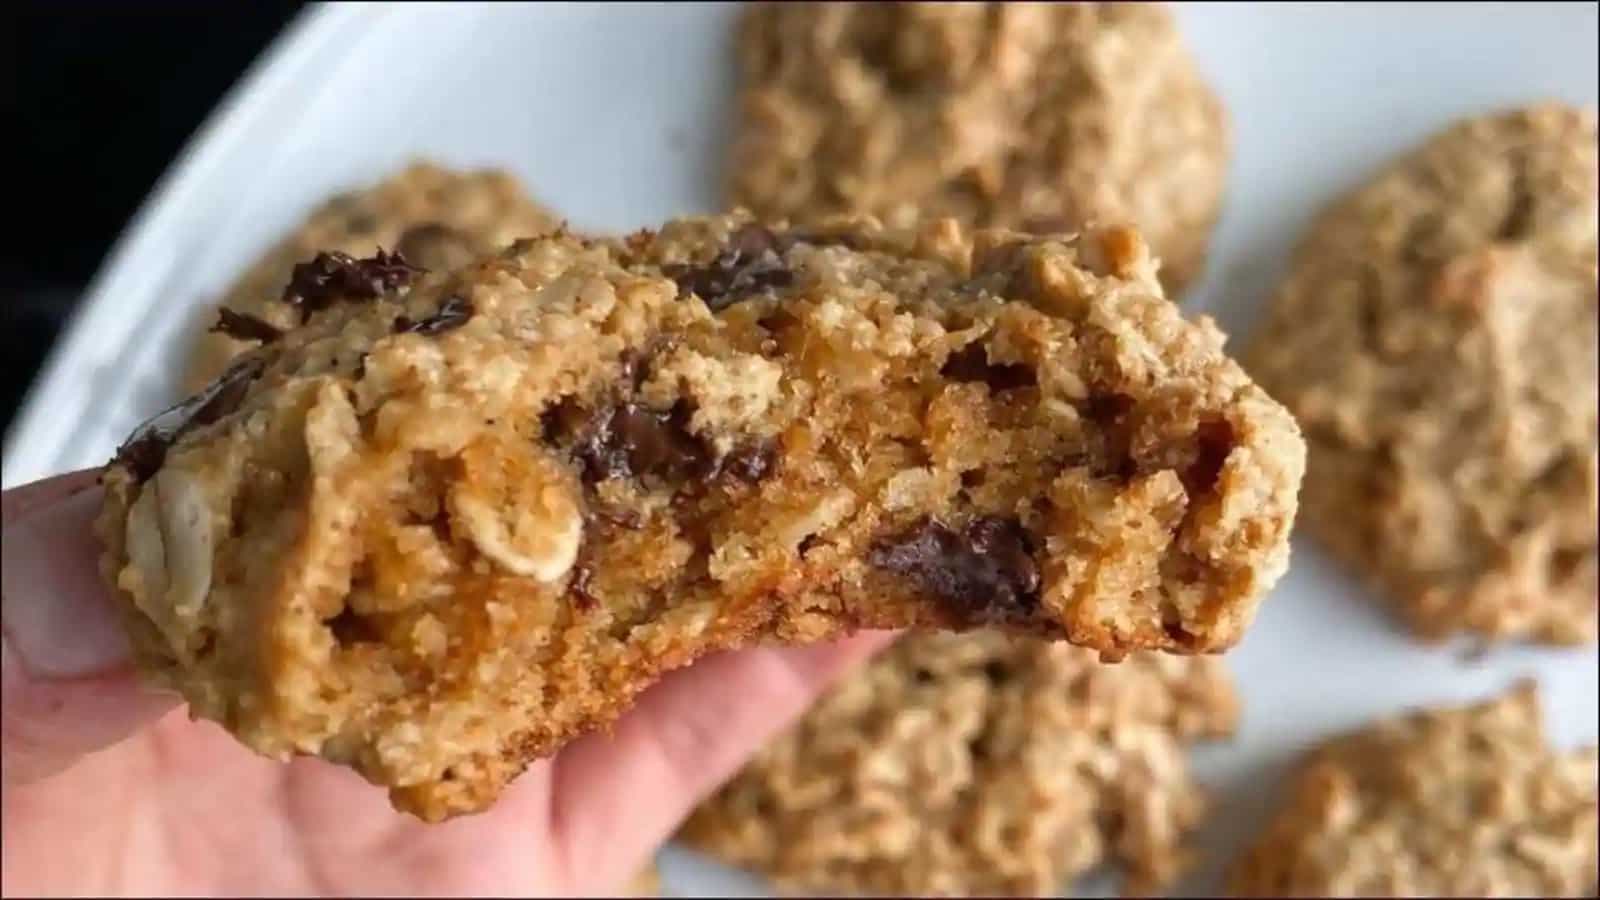 Recipe: Let soft and chewy oatmeal choc chip cookies be your new comfort food